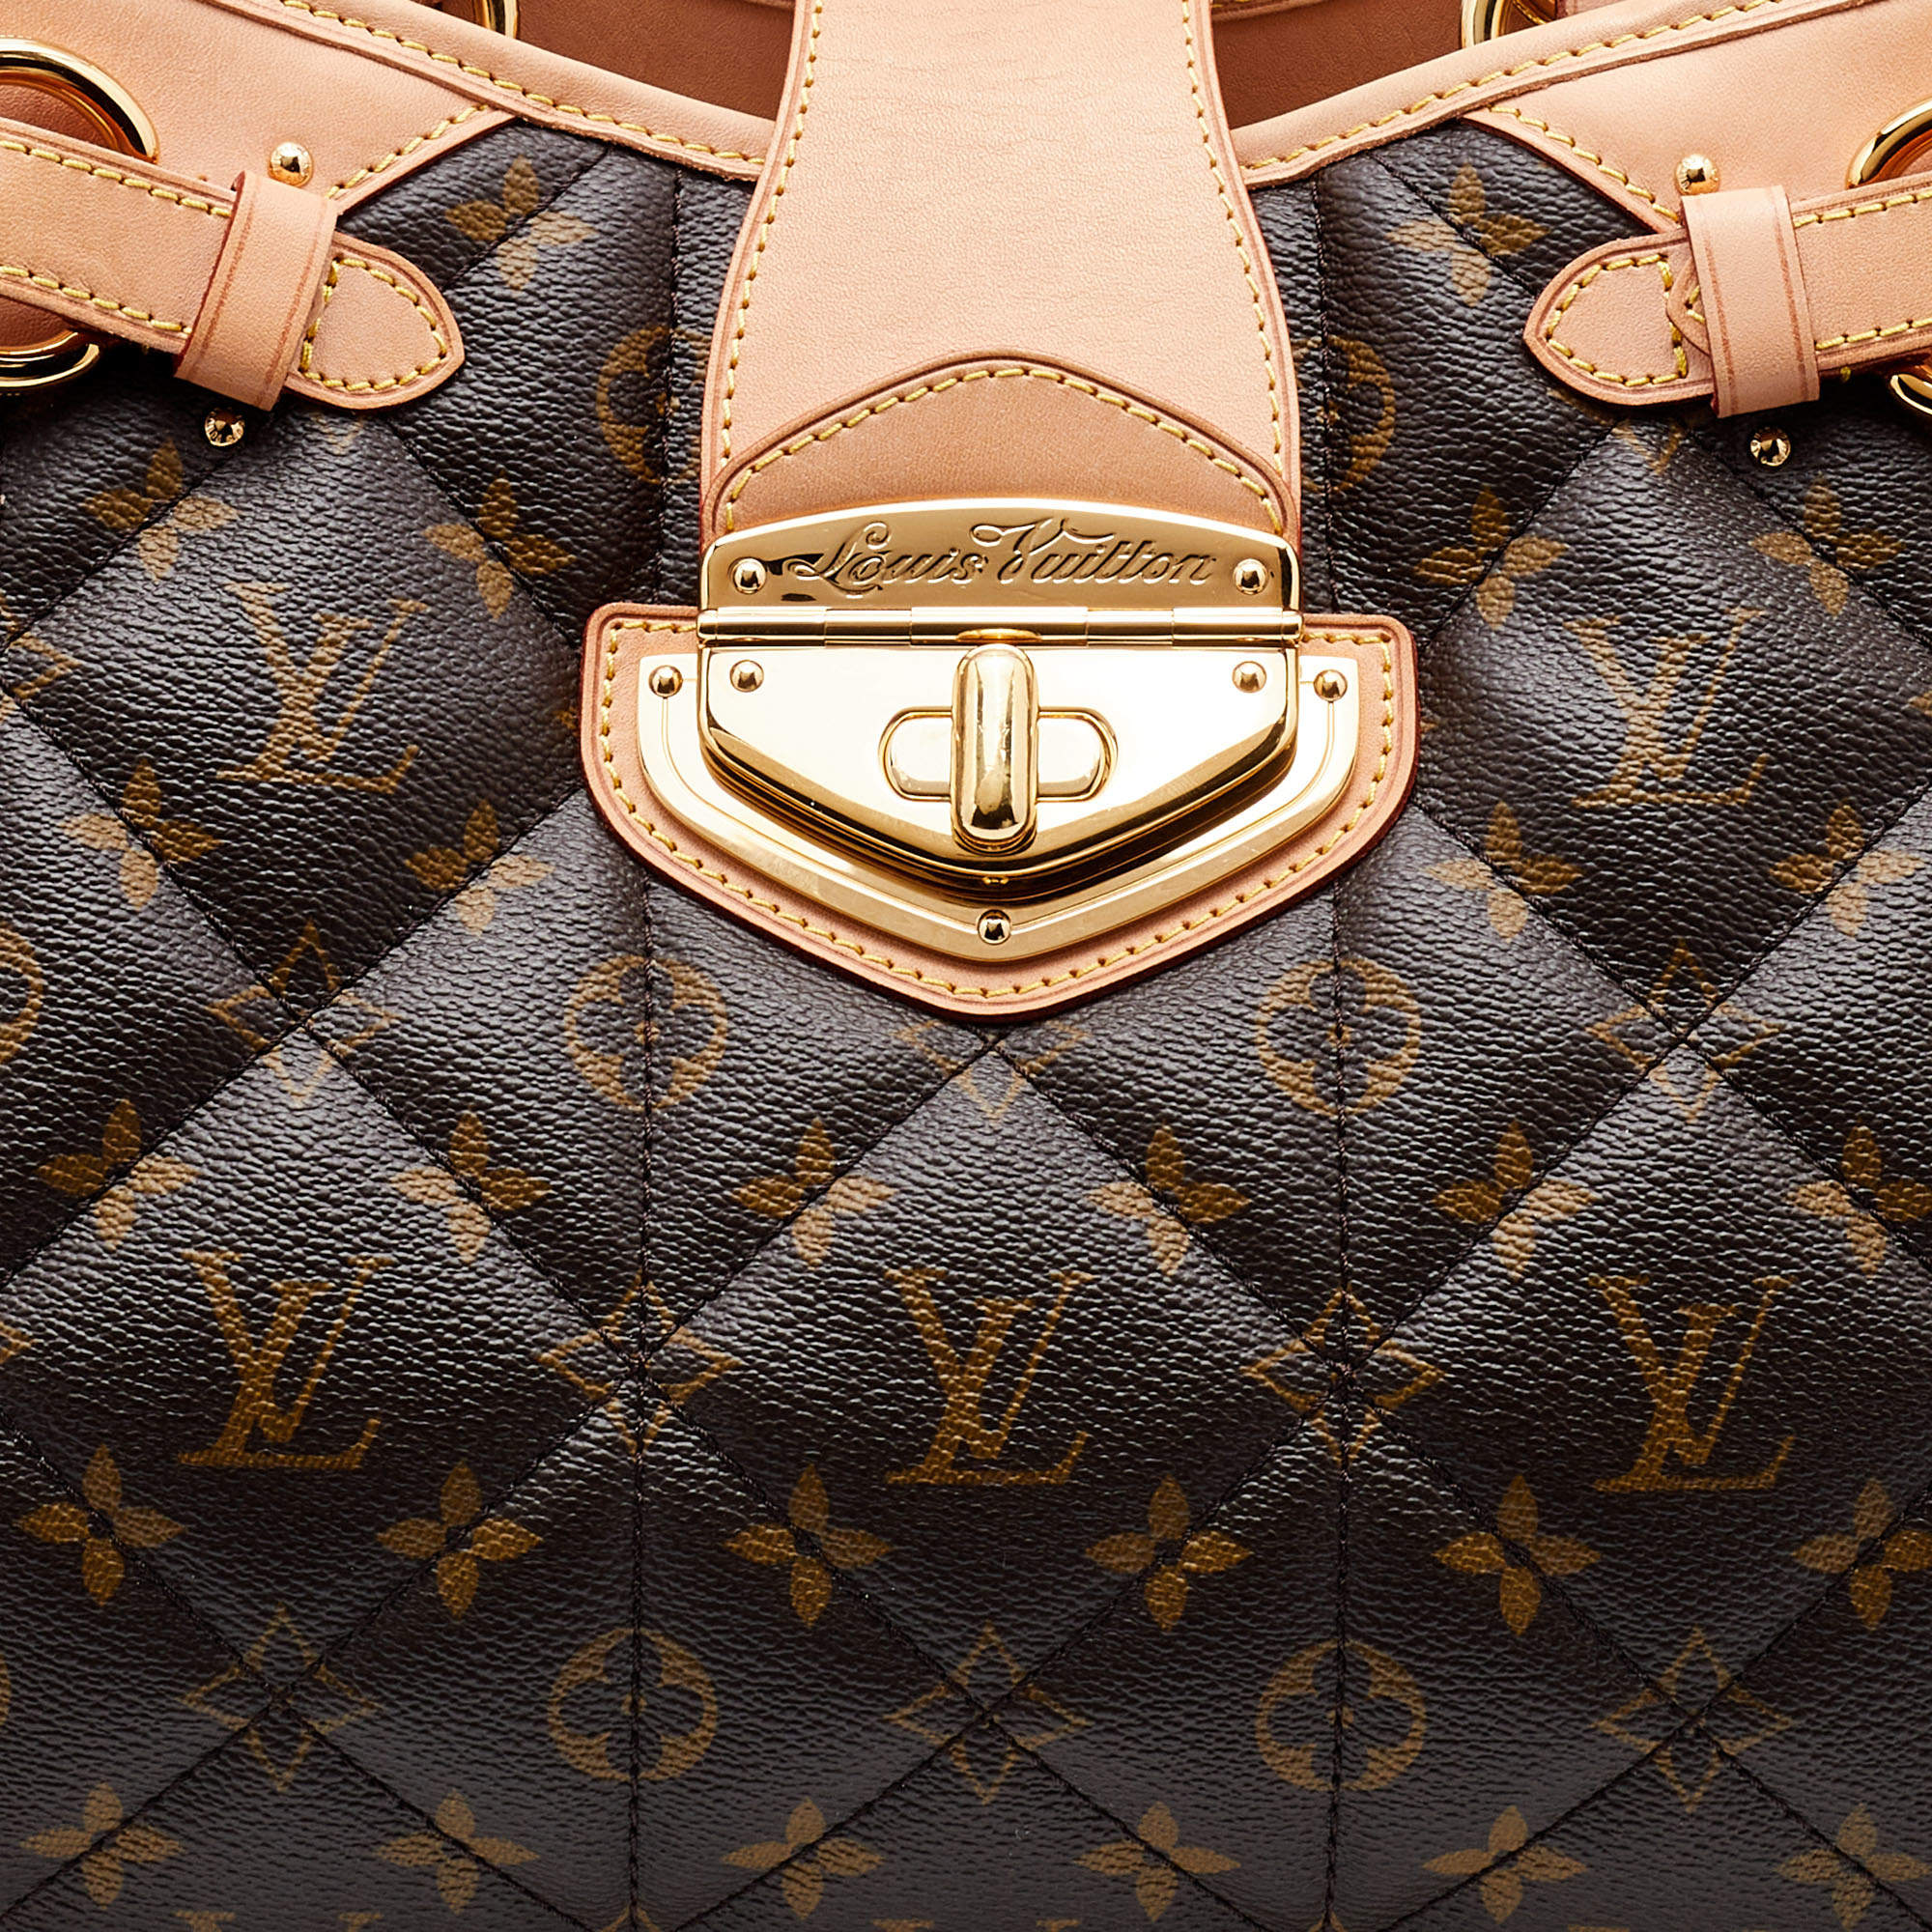 Louis Vuitton Monogram Etoile Bag Reference Guide - Spotted Fashion